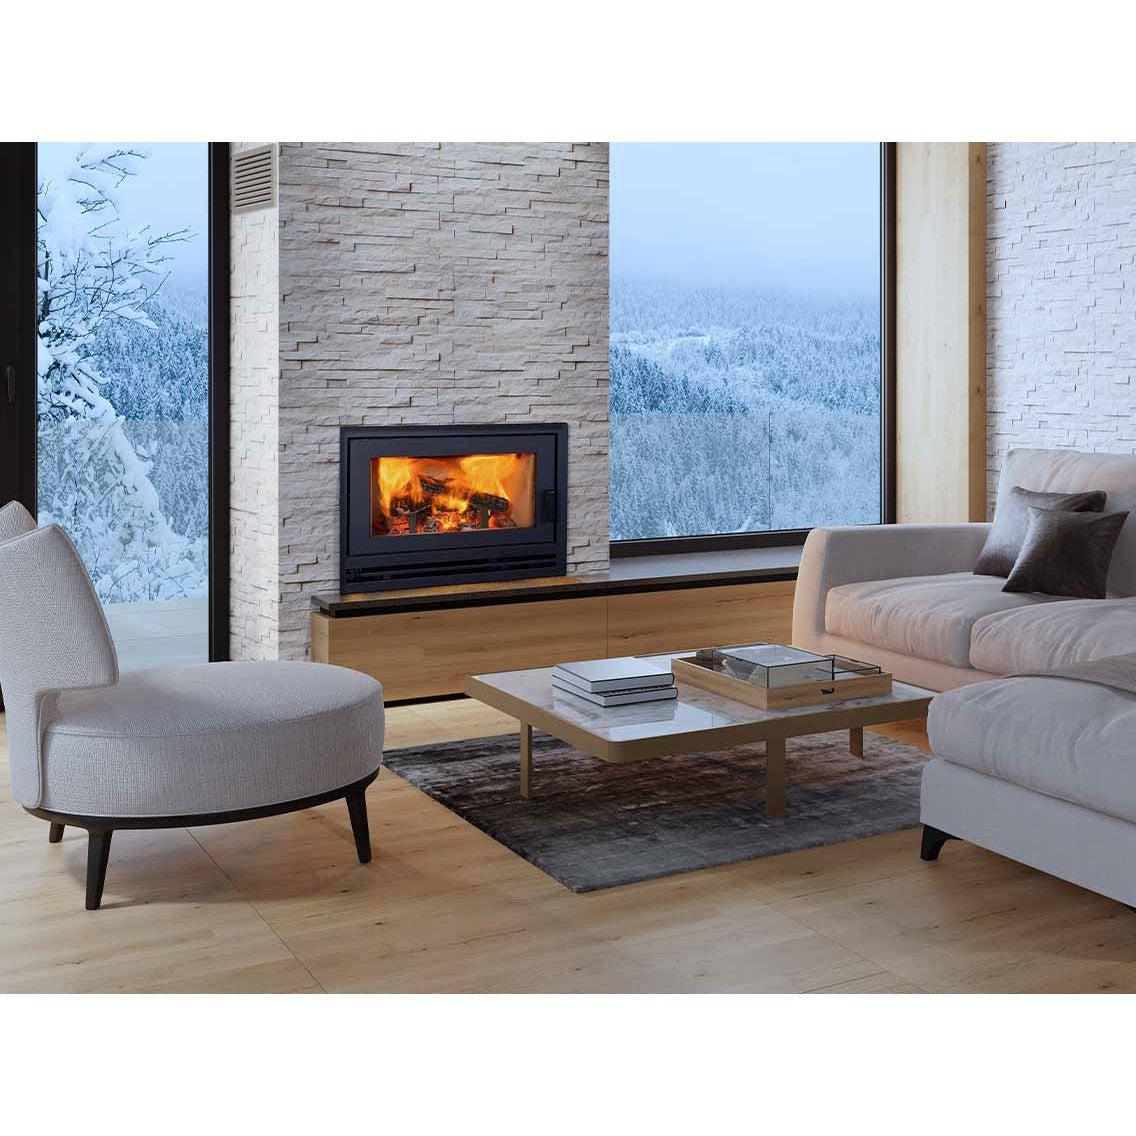 Superior WCT4920 22" EPA Certified Traditional Wood Burning Fireplace With White Smooth Refractory Panels